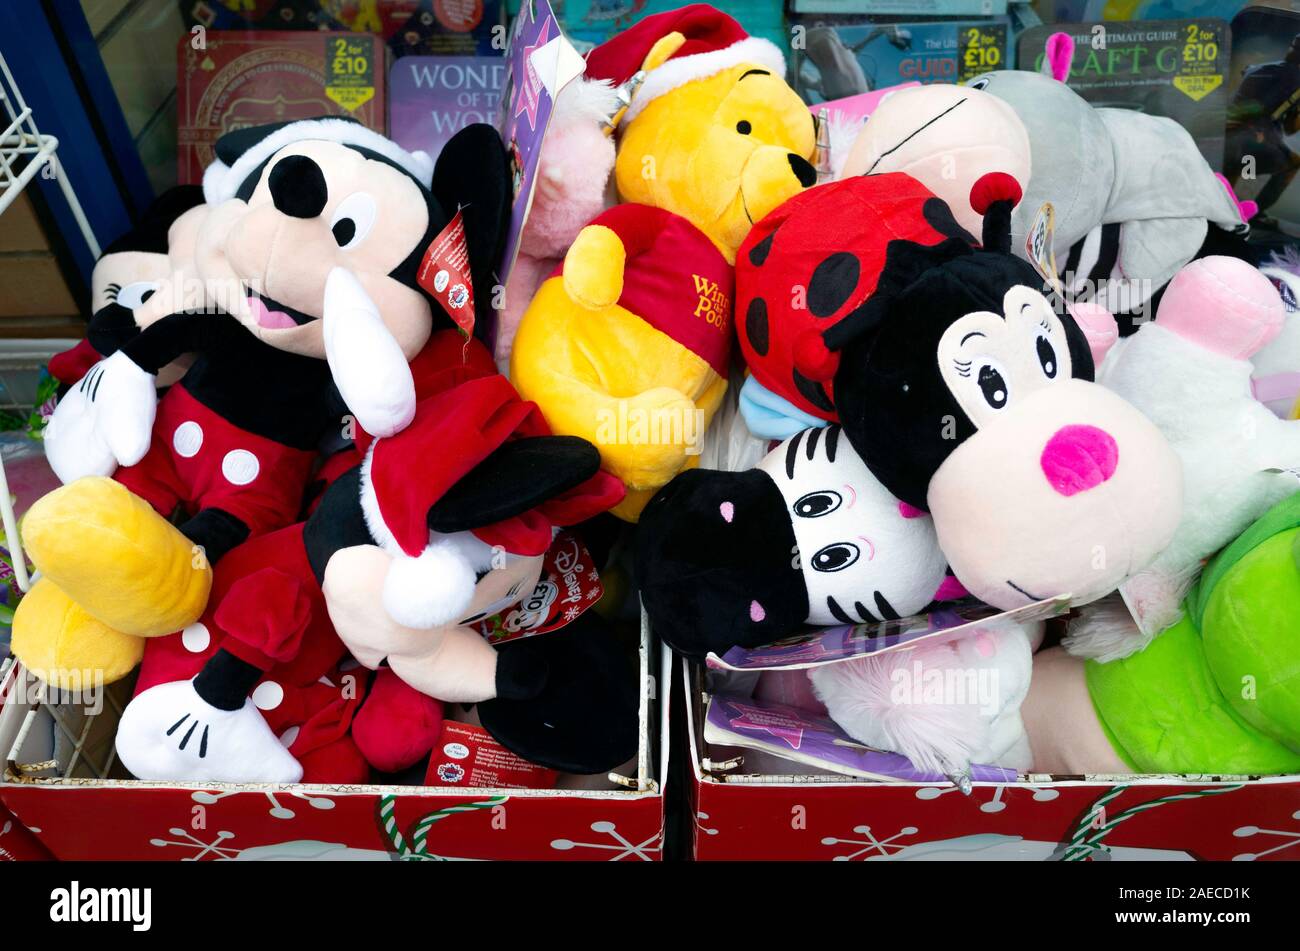 Display of soft toy animals outside a shop for the Christmas sale market Stock Photo